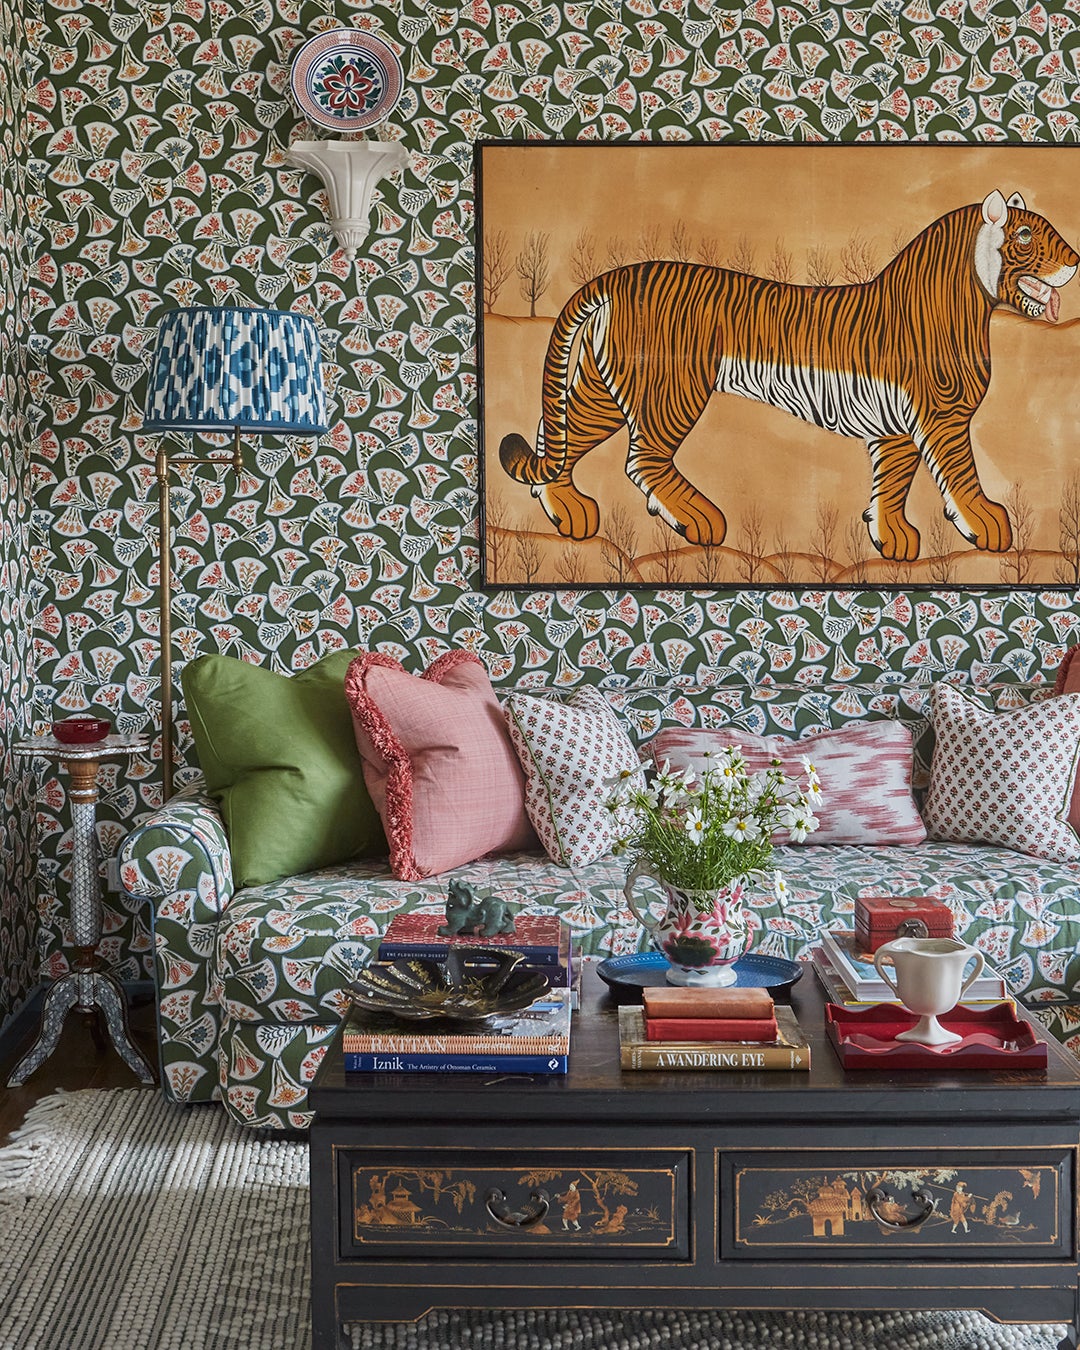 green patterned wallpaper and sofa with tiger artwork